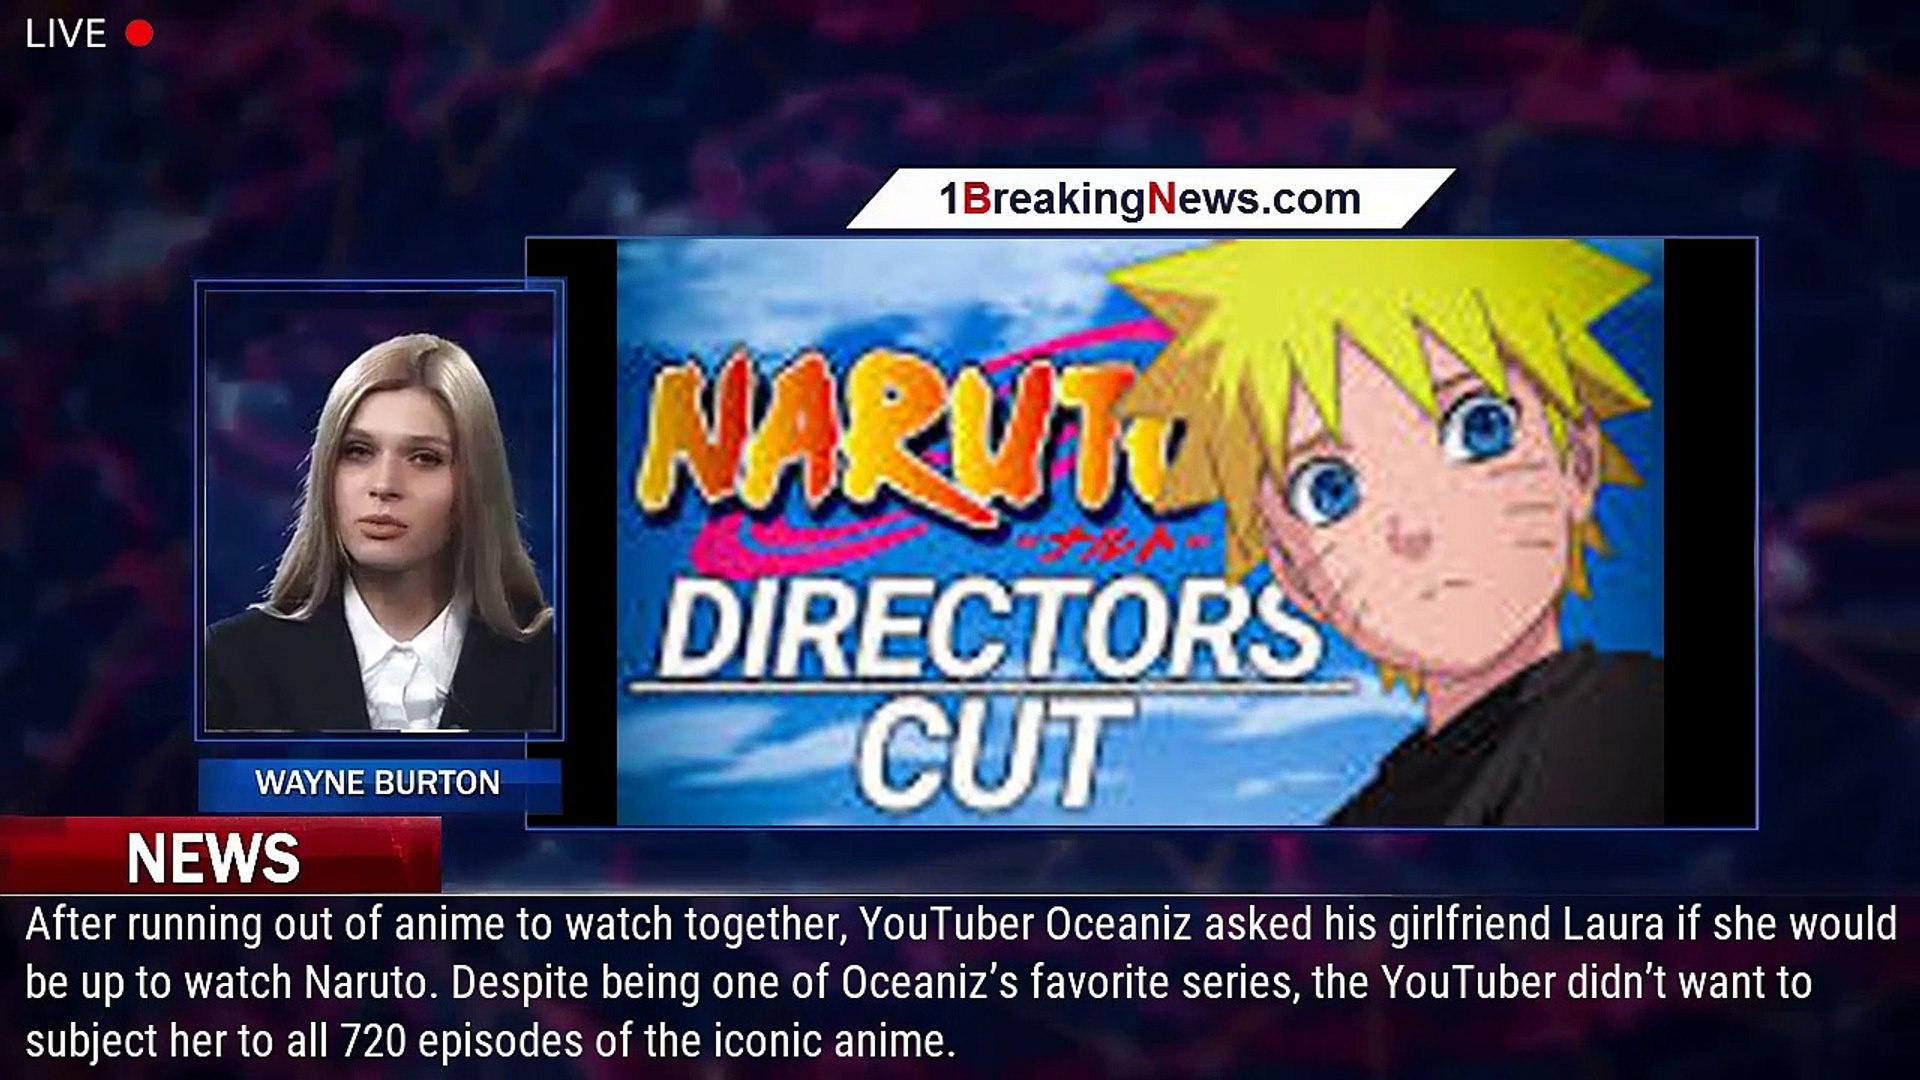 Boyfriend Removes 115 Hours of Filler in 'Naruto' for His Girlfriend